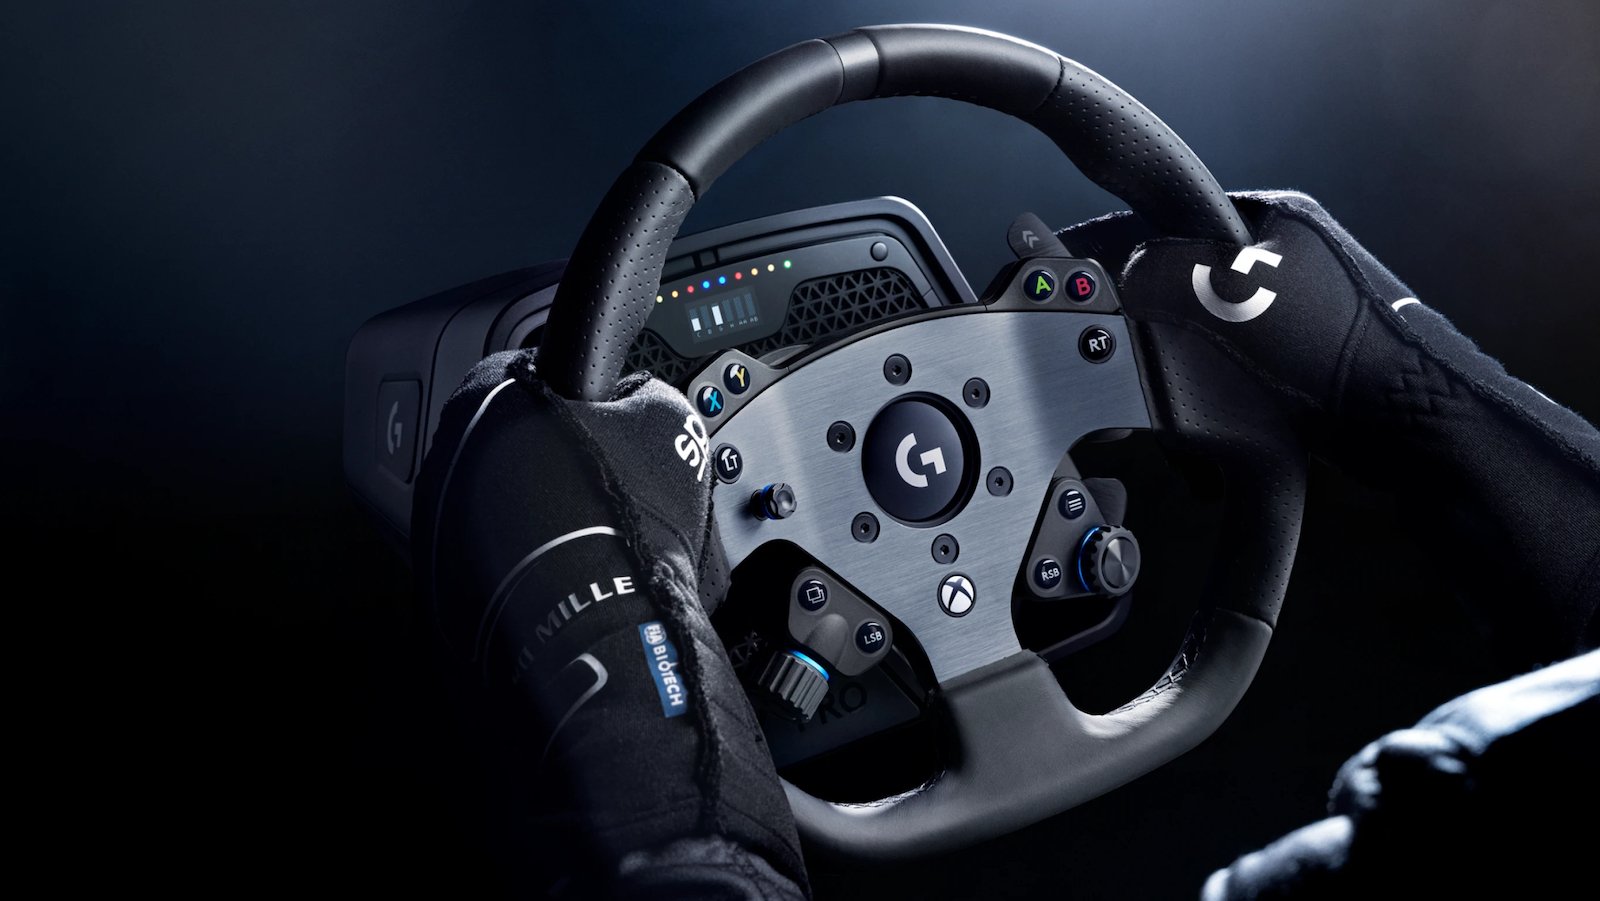 Logitech G PRO Racing Wheel comes with Direct Drive and TRUEFORCE feedback technology